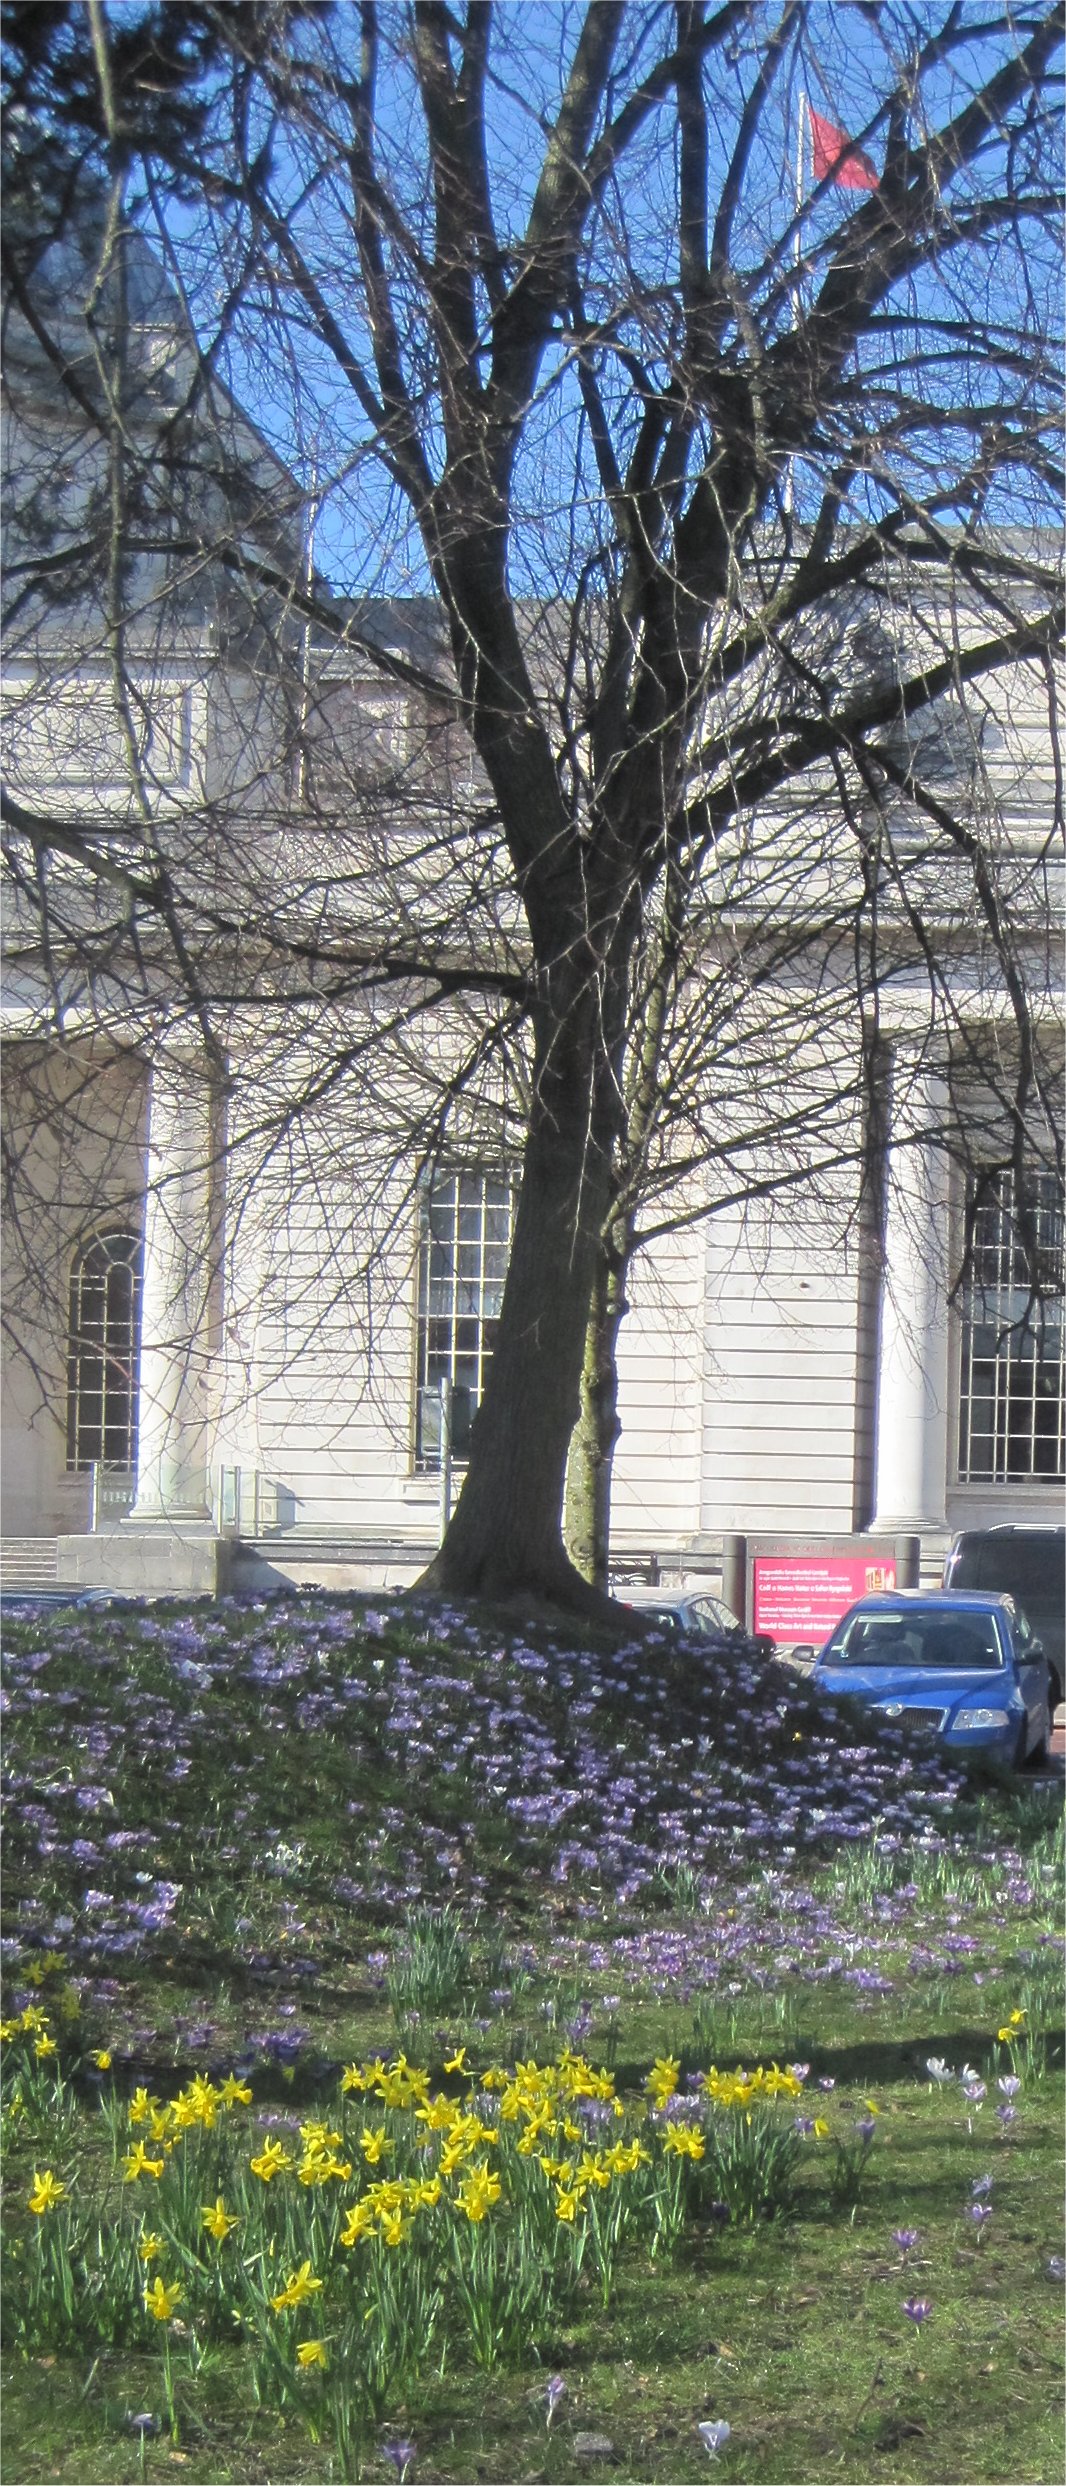 cardiff museum in spring by Juliamaud